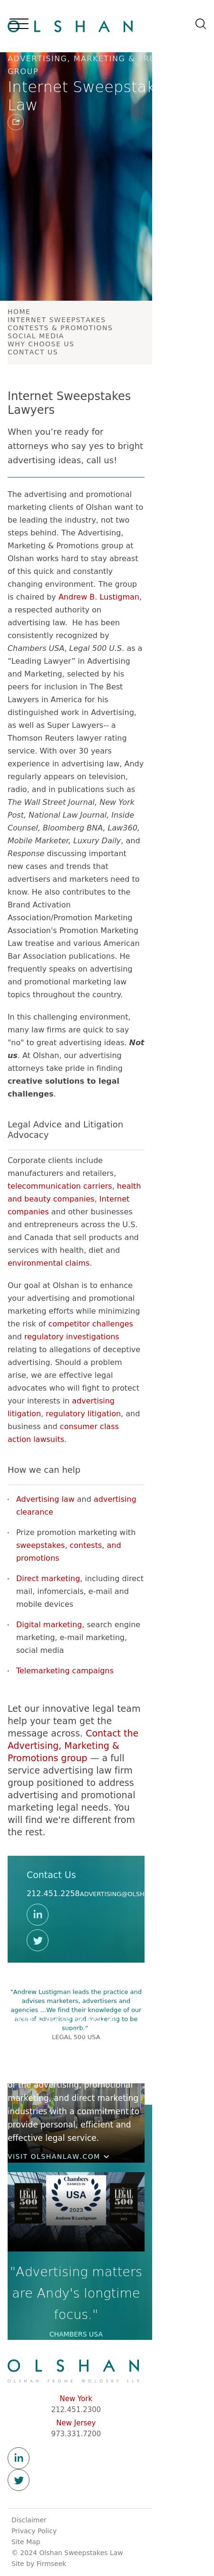 Olshan Frome Wolosky LLP: Advertising, Marketing & Promotions Group - New York NY Lawyers